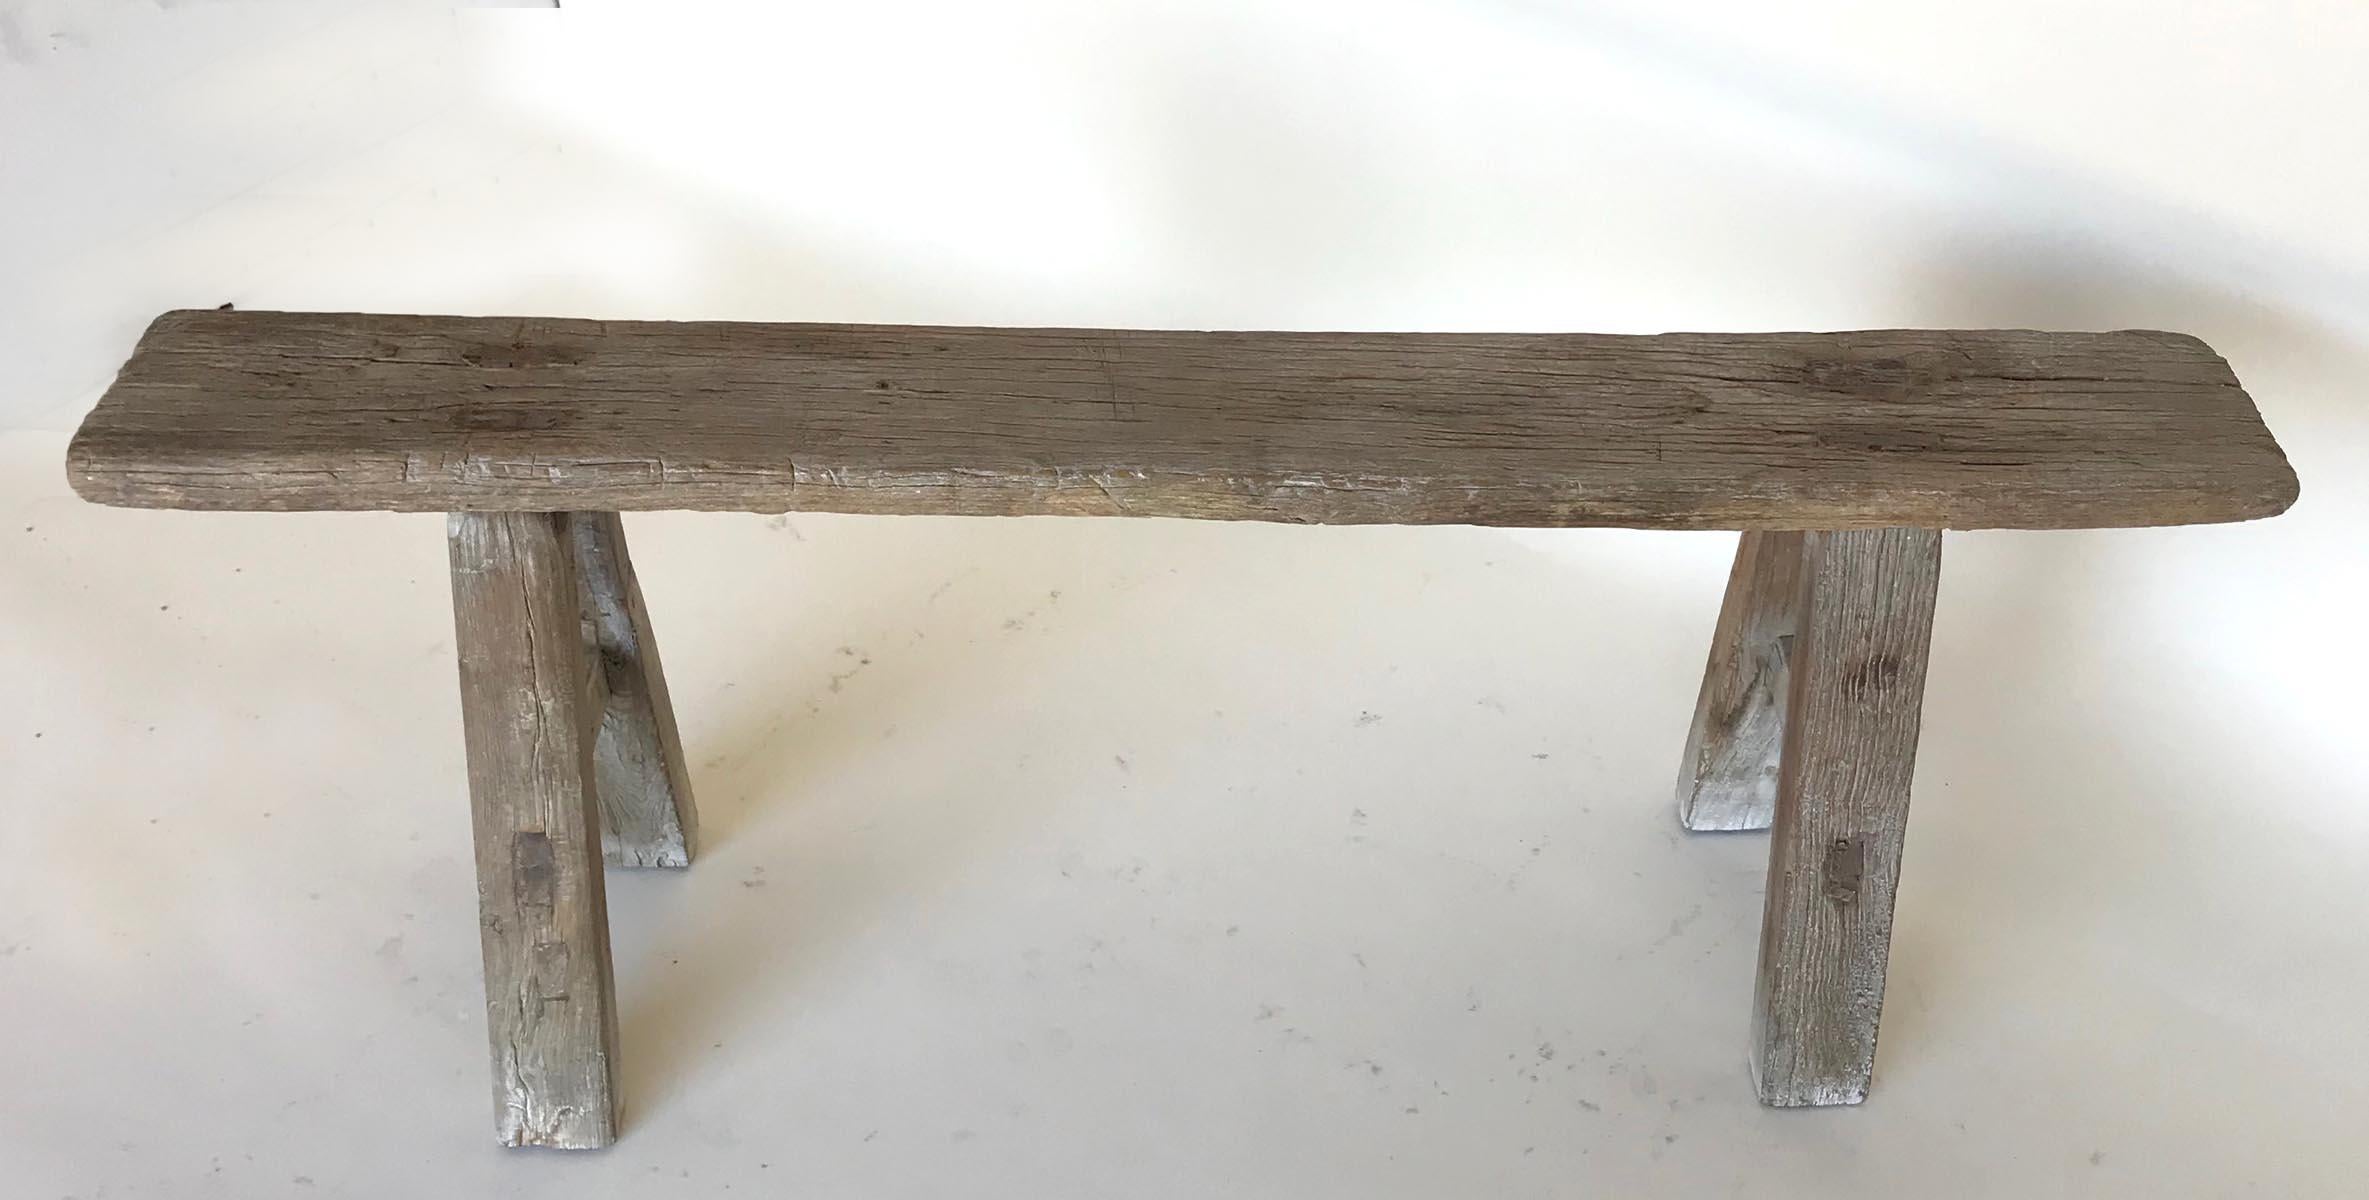 Vintage narrow elm bench with mortise and Tenon construction and smooth weathered patina.